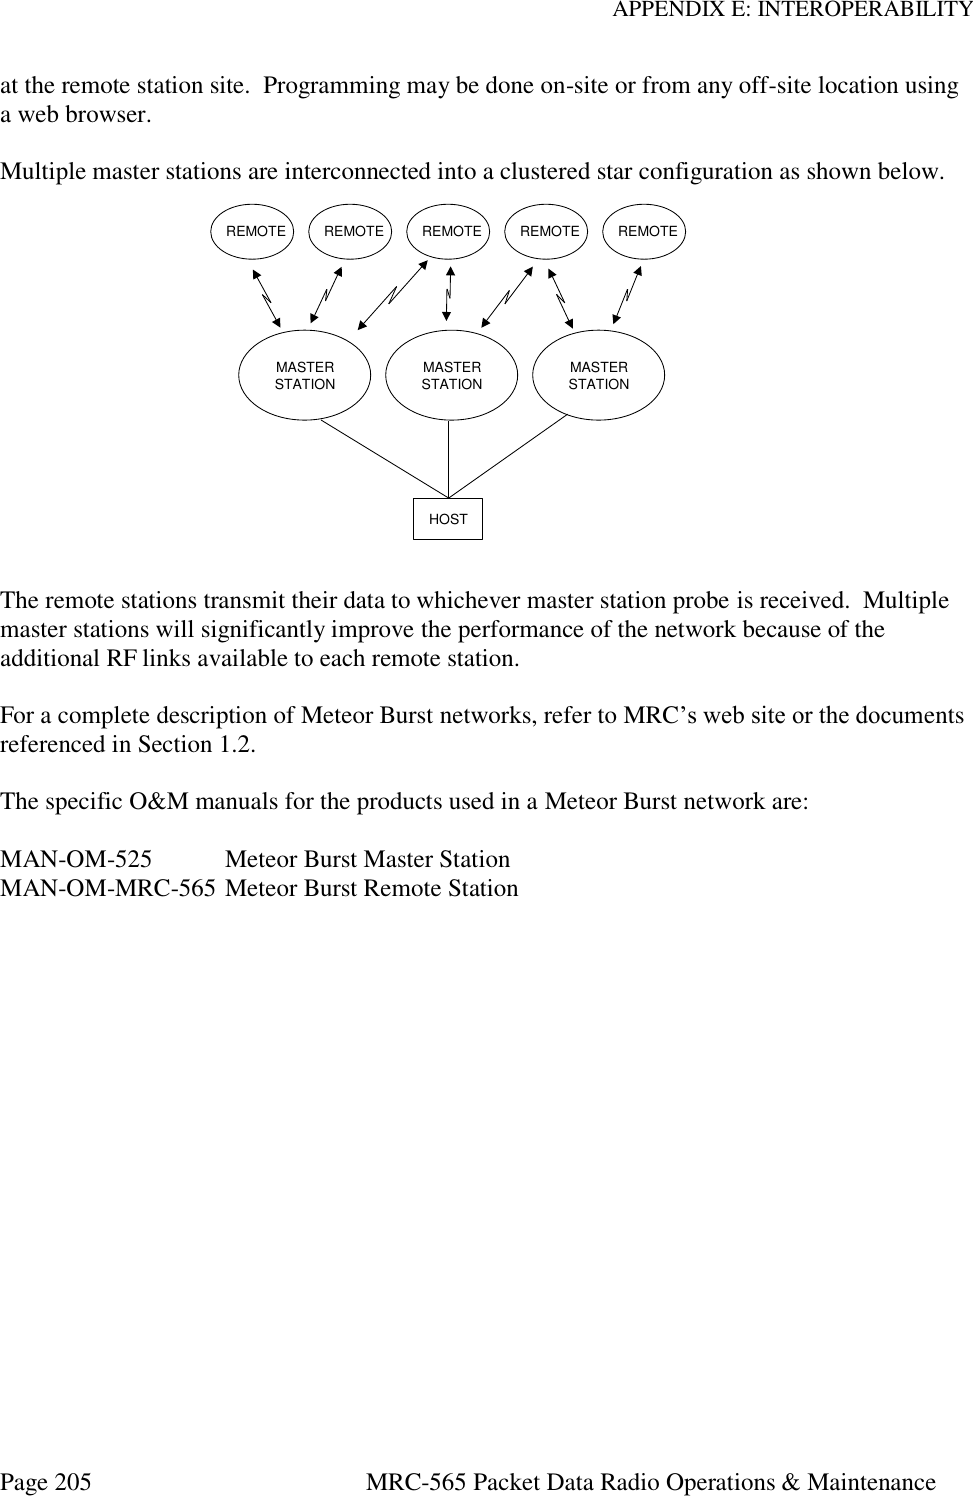 APPENDIX E: INTEROPERABILITY Page 205  MRC-565 Packet Data Radio Operations &amp; Maintenance at the remote station site.  Programming may be done on-site or from any off-site location using a web browser.  Multiple master stations are interconnected into a clustered star configuration as shown below. The remote stations transmit their data to whichever master station probe is received.  Multiple master stations will significantly improve the performance of the network because of the additional RF links available to each remote station.  For a complete description of Meteor Burst networks, refer to MRC’s web site or the documents referenced in Section 1.2.   The specific O&amp;M manuals for the products used in a Meteor Burst network are:  MAN-OM-525  Meteor Burst Master Station MAN-OM-MRC-565 Meteor Burst Remote Station   MASTERSTATIONREMOTEREMOTE REMOTE REMOTE REMOTEHOSTMASTERSTATIONMASTERSTATION